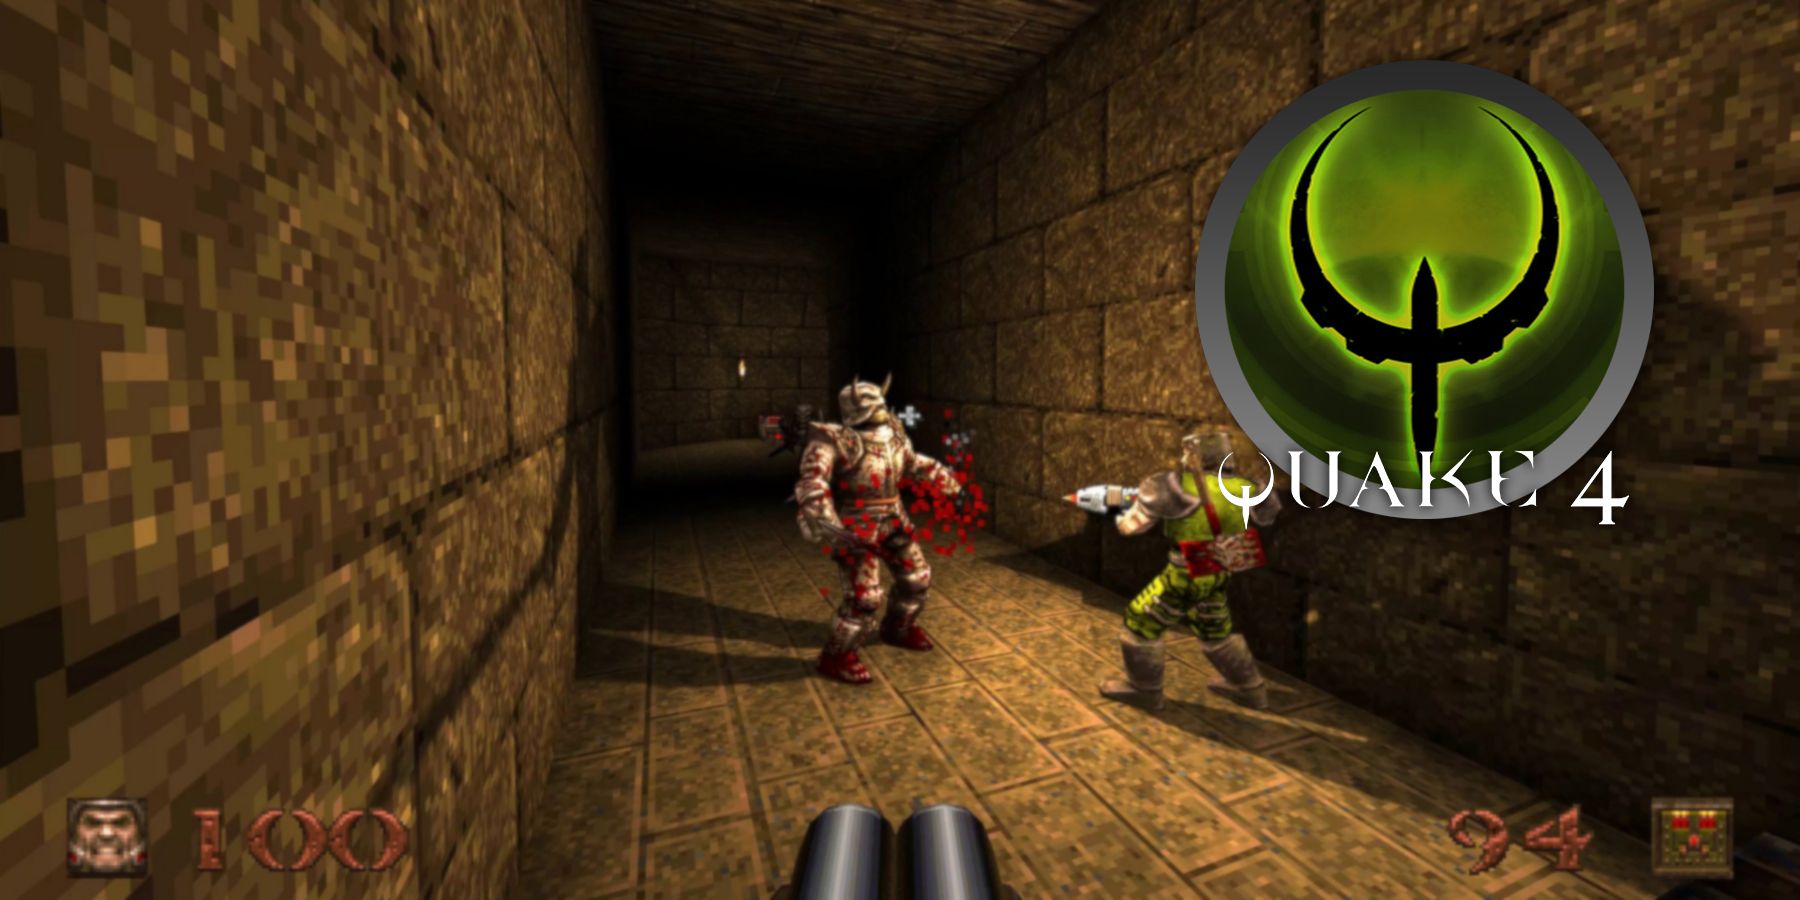 A screenshot from Quake 1 which shows the Quake 4 logo off to one side.